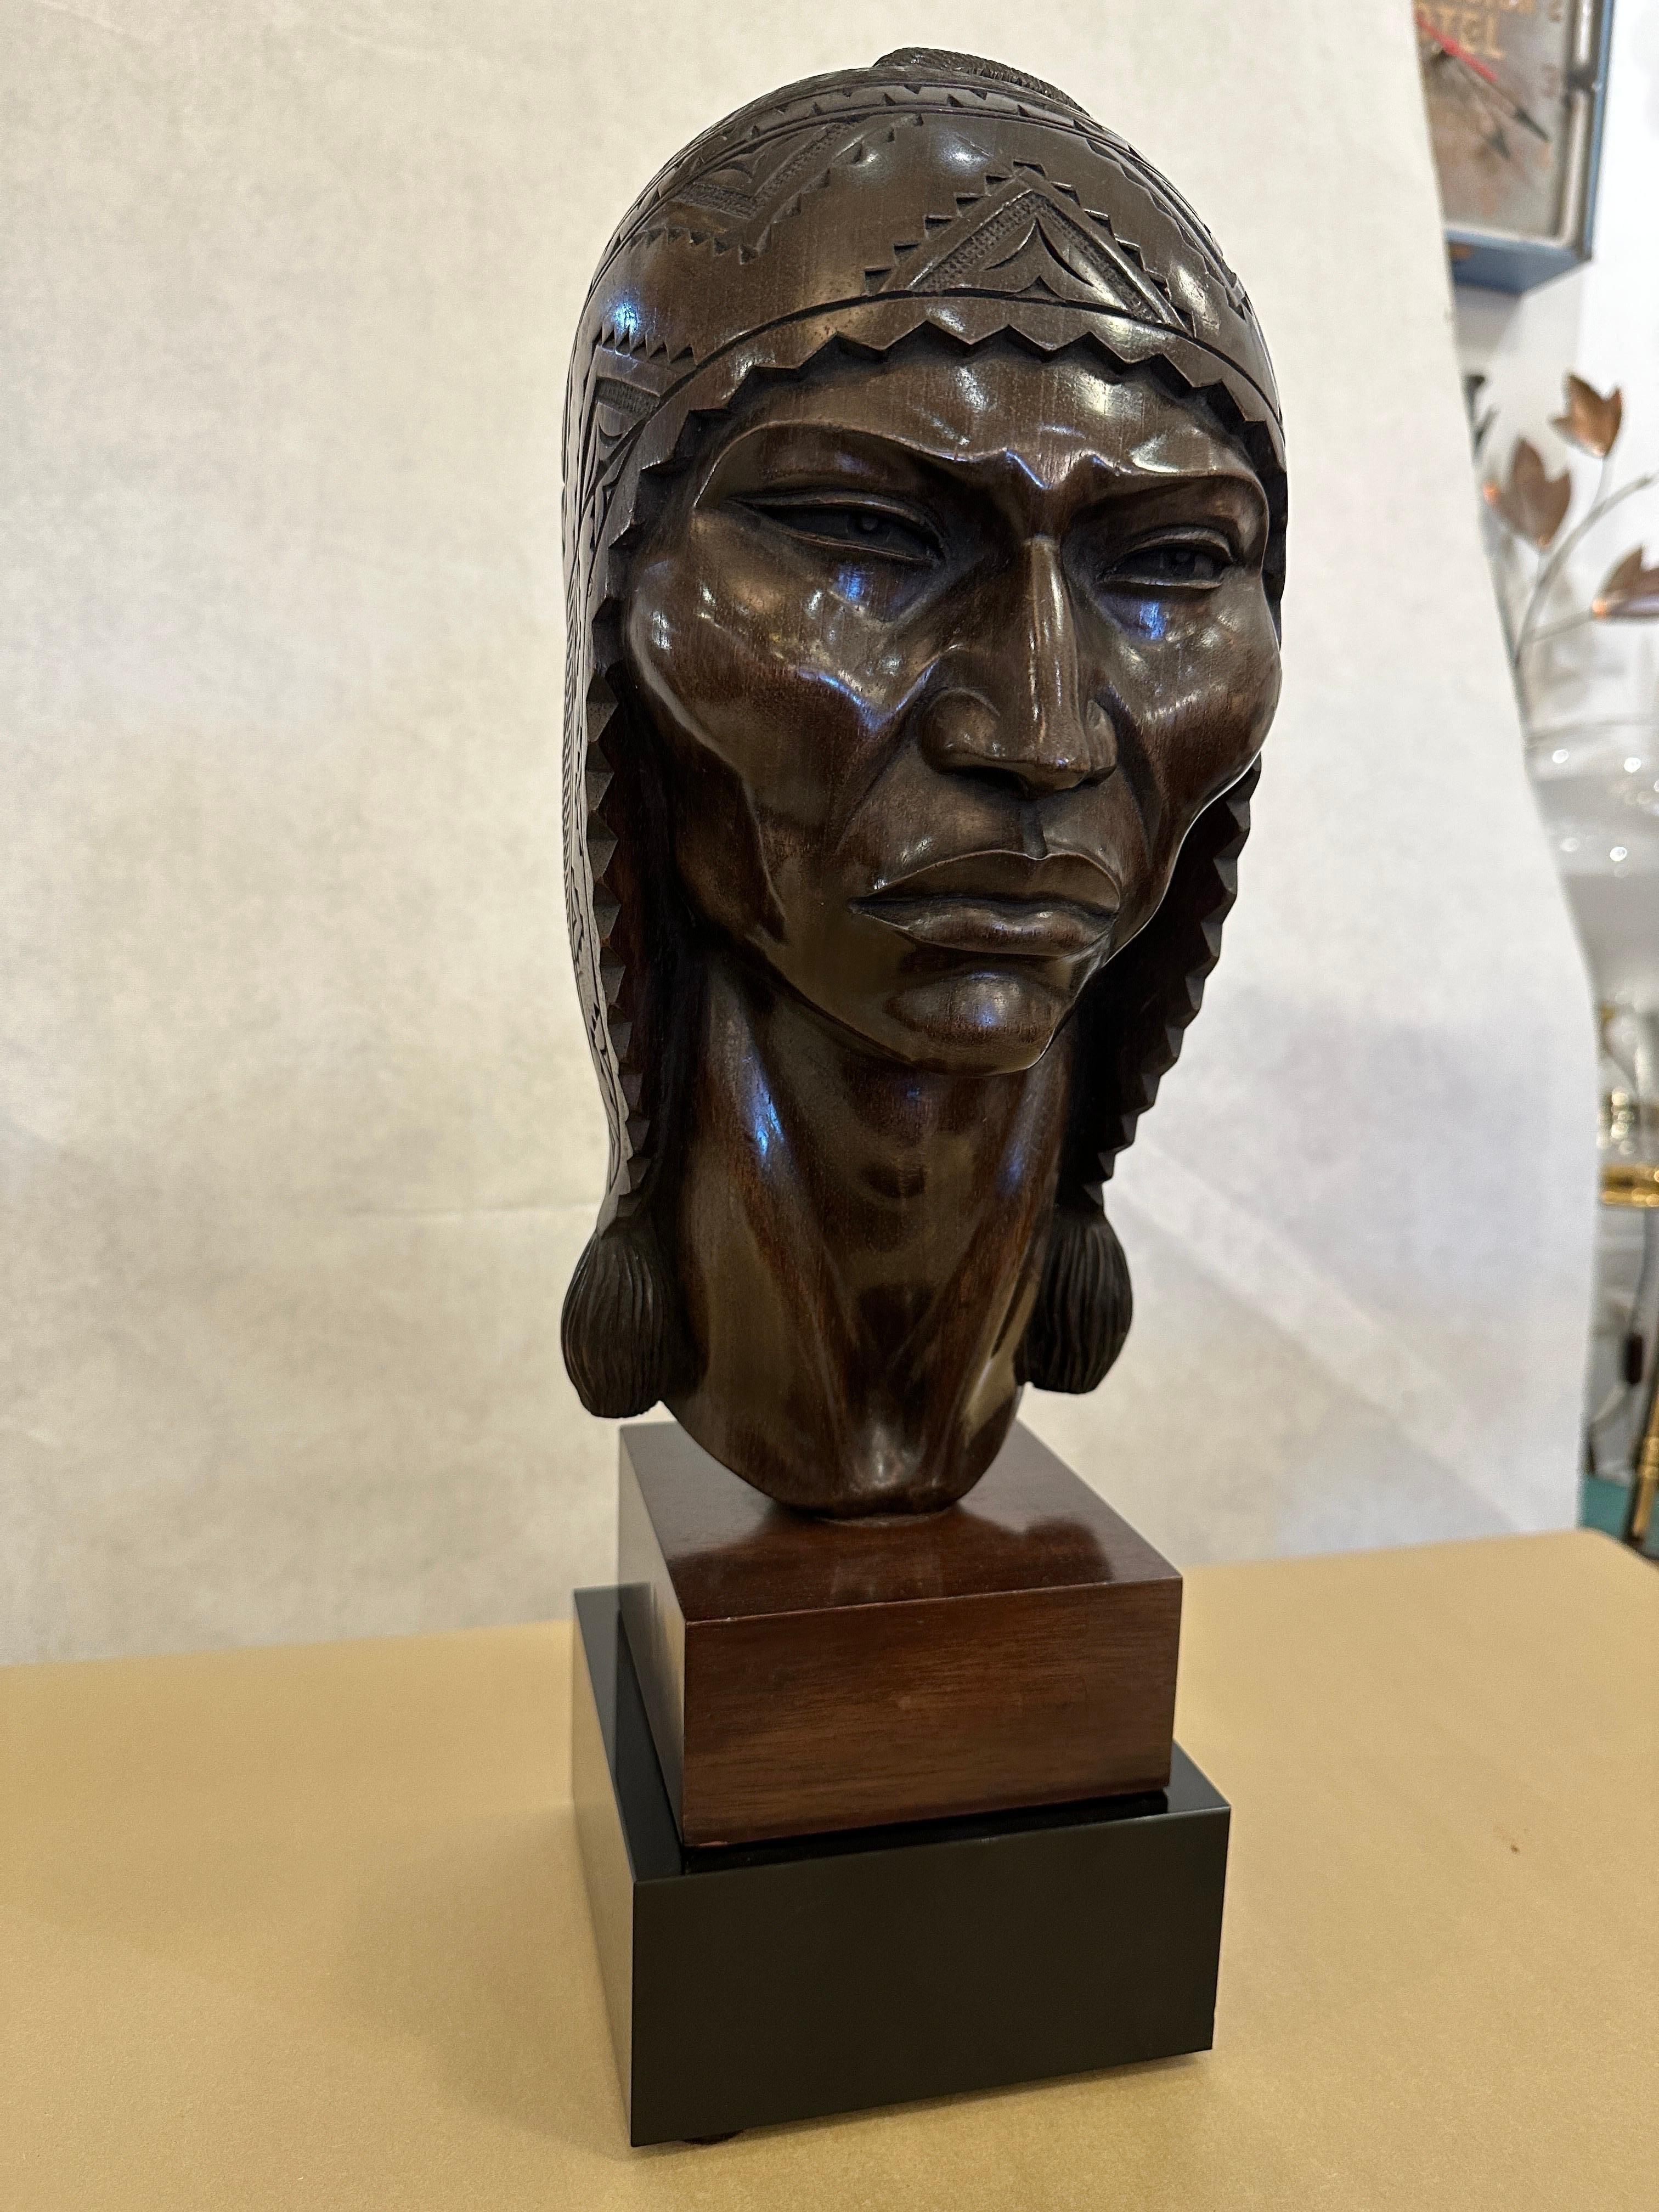 This beautifully and intricately carved vintage bust of an Incan warrior male by SARAVIA. This wonderful dark wood sits atop a custom created black glass pedestal base (not attached). The features of the face, hair and woven cap are masterfully